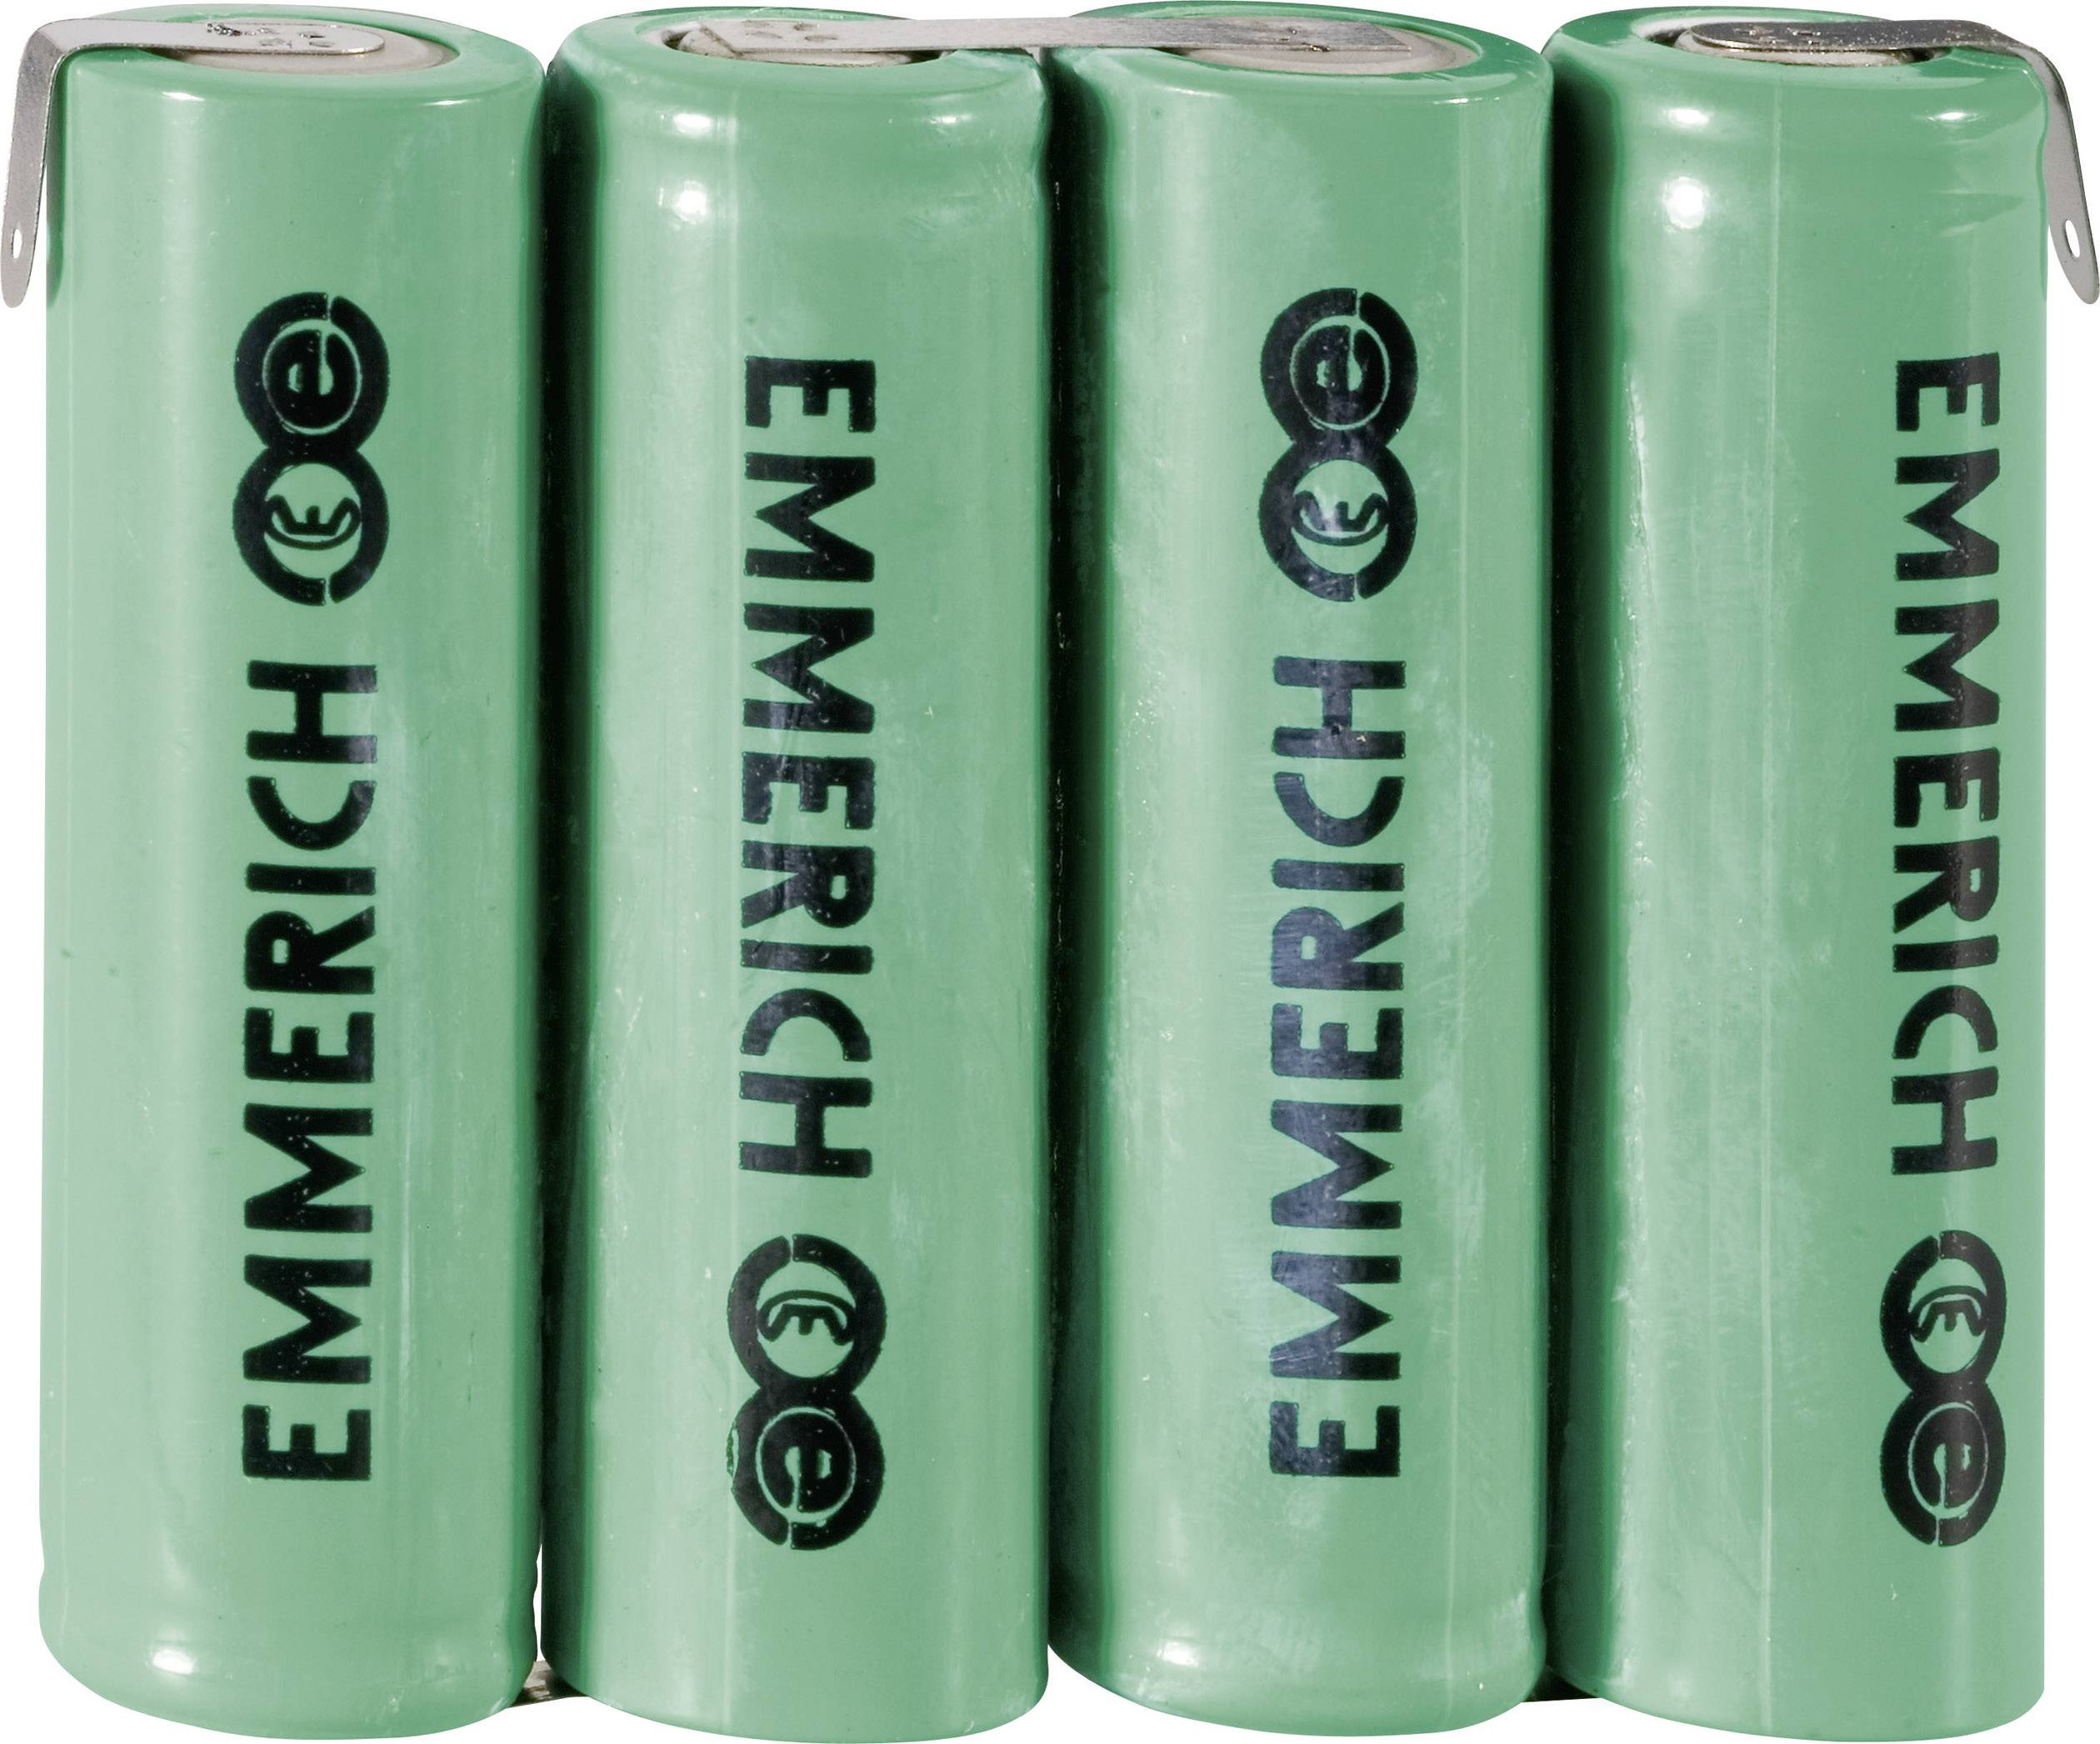 4 aa rechargeable battery pack